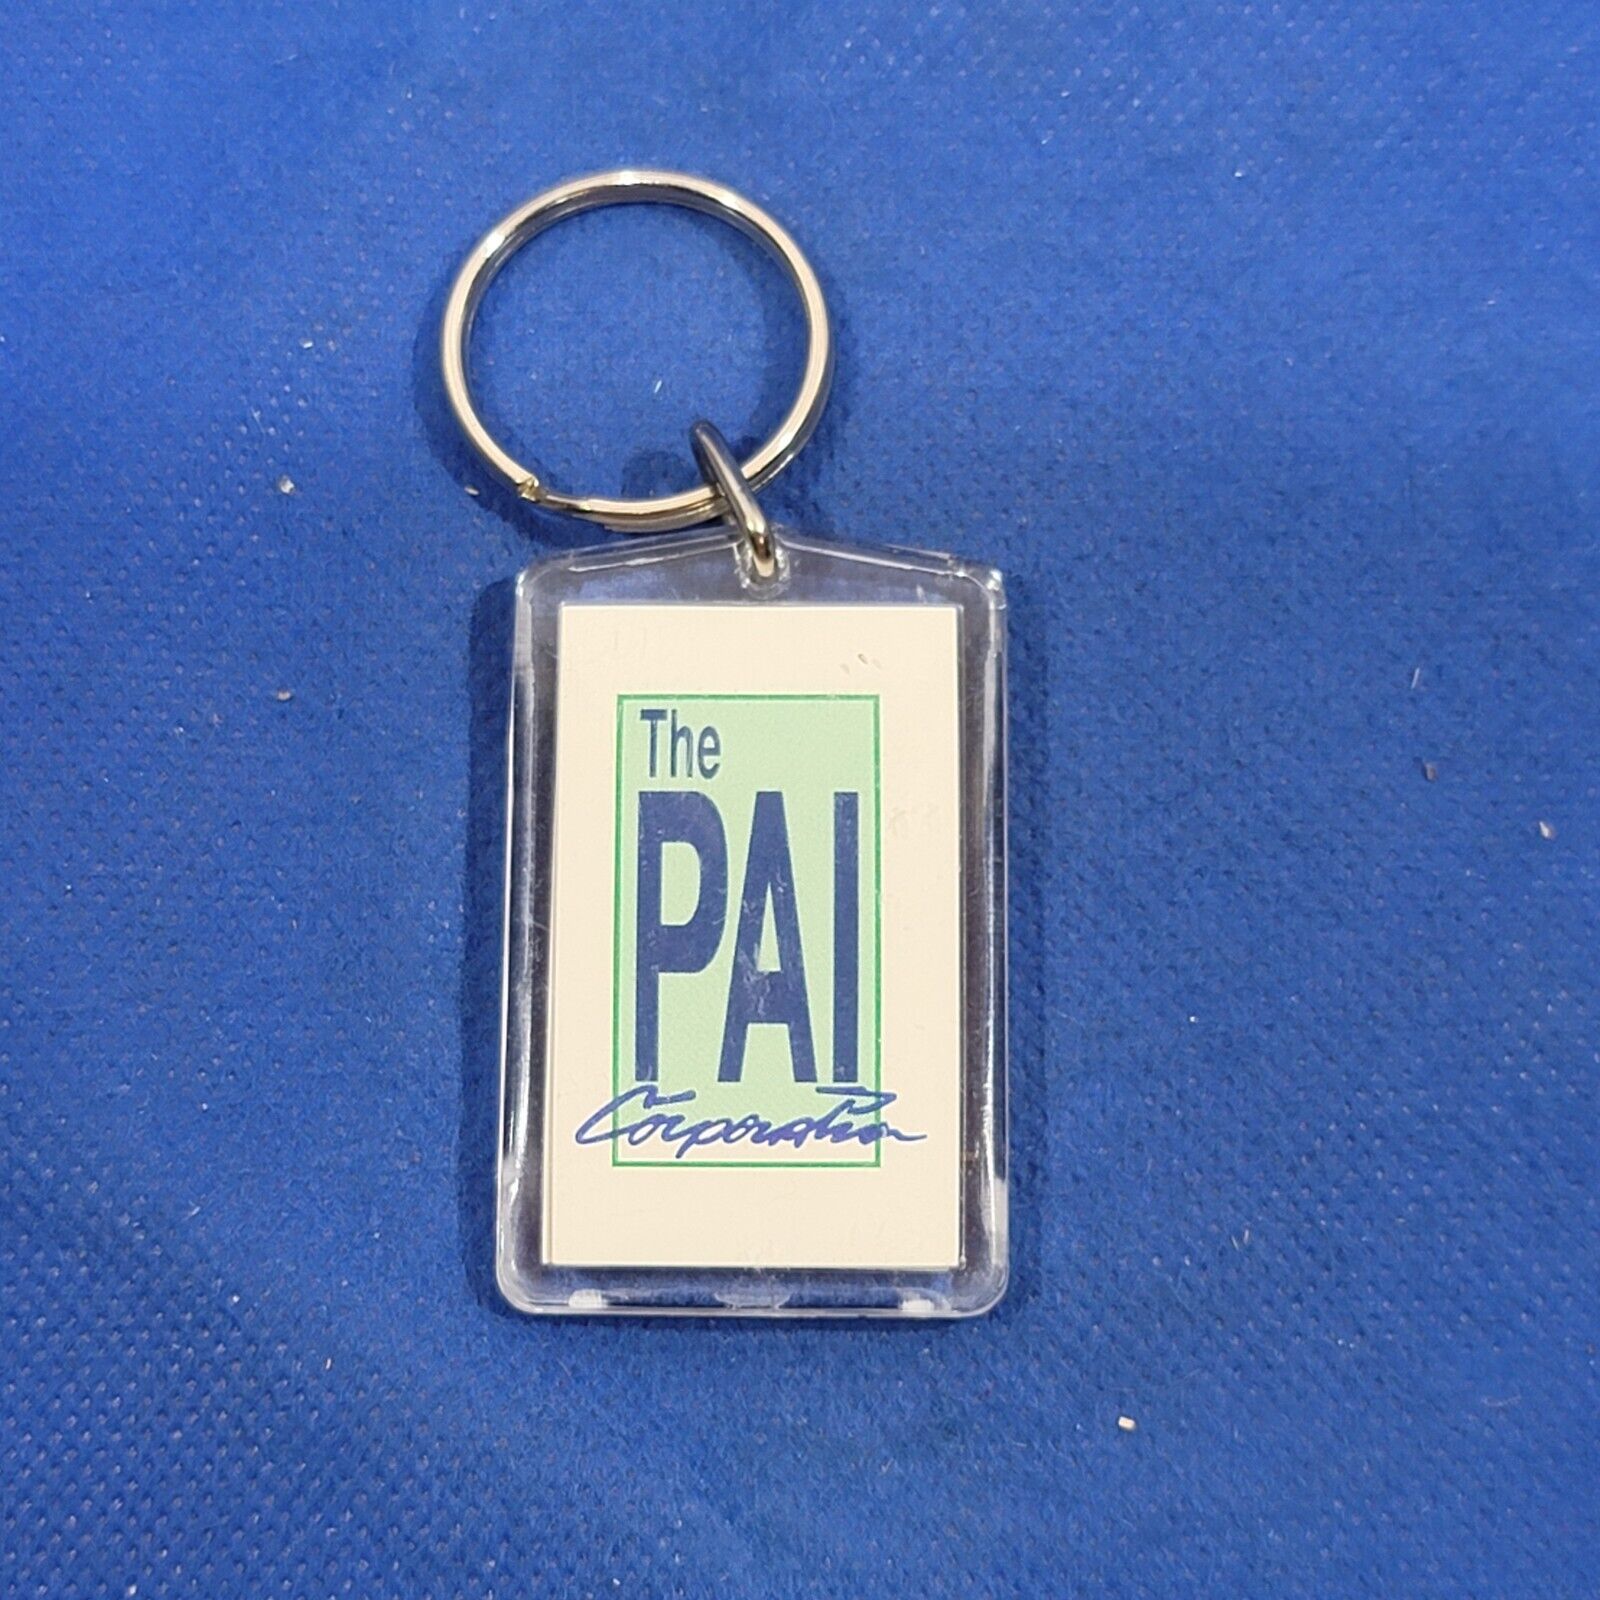 Vintage Keychain The PAI Collectable plastic Keyring